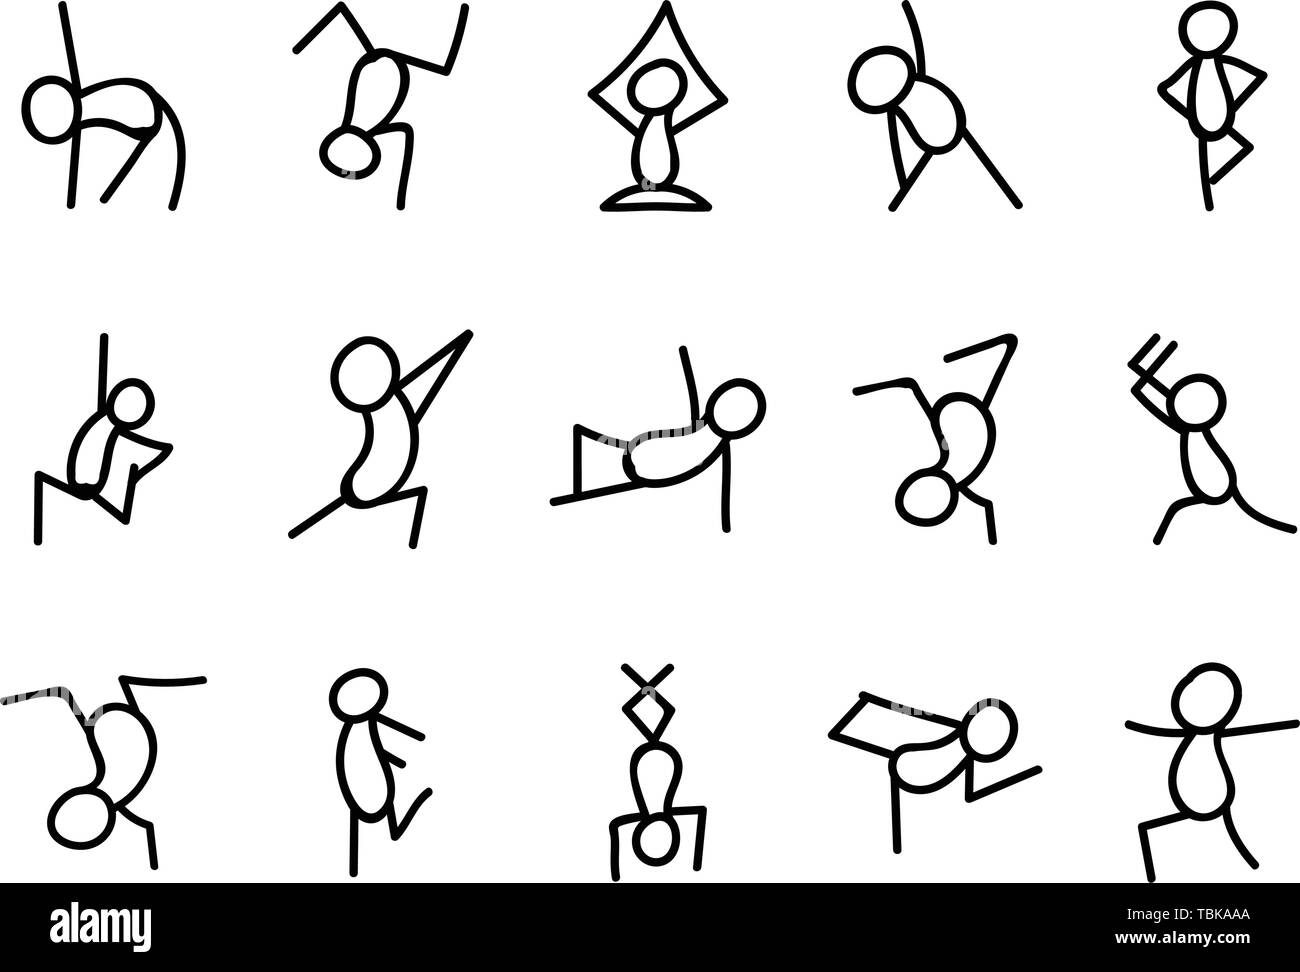 Exercise Stick Figure Set High Resolution Stock Photography and Images -  Alamy